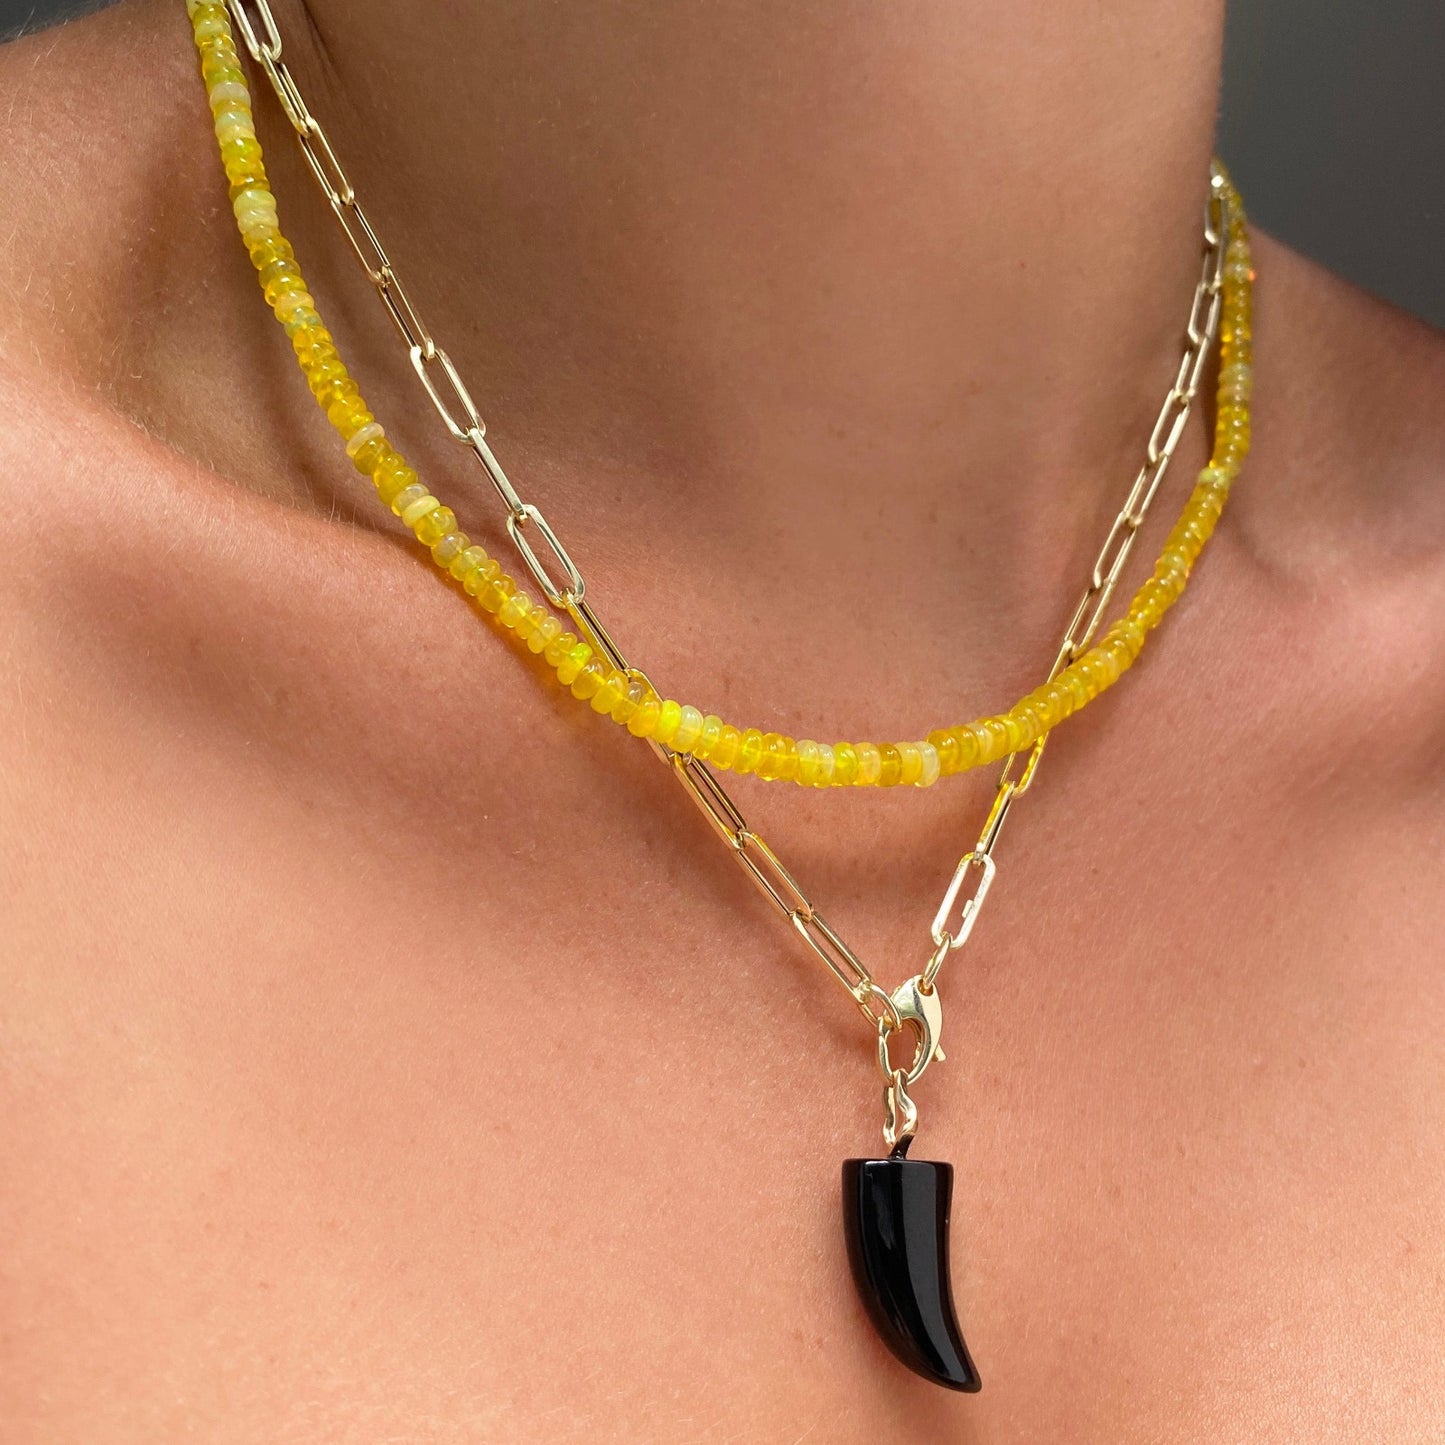 Black agate horn charm. Styled on a neck hanging from the lobster clasp of a chunky paperclip chain necklace.